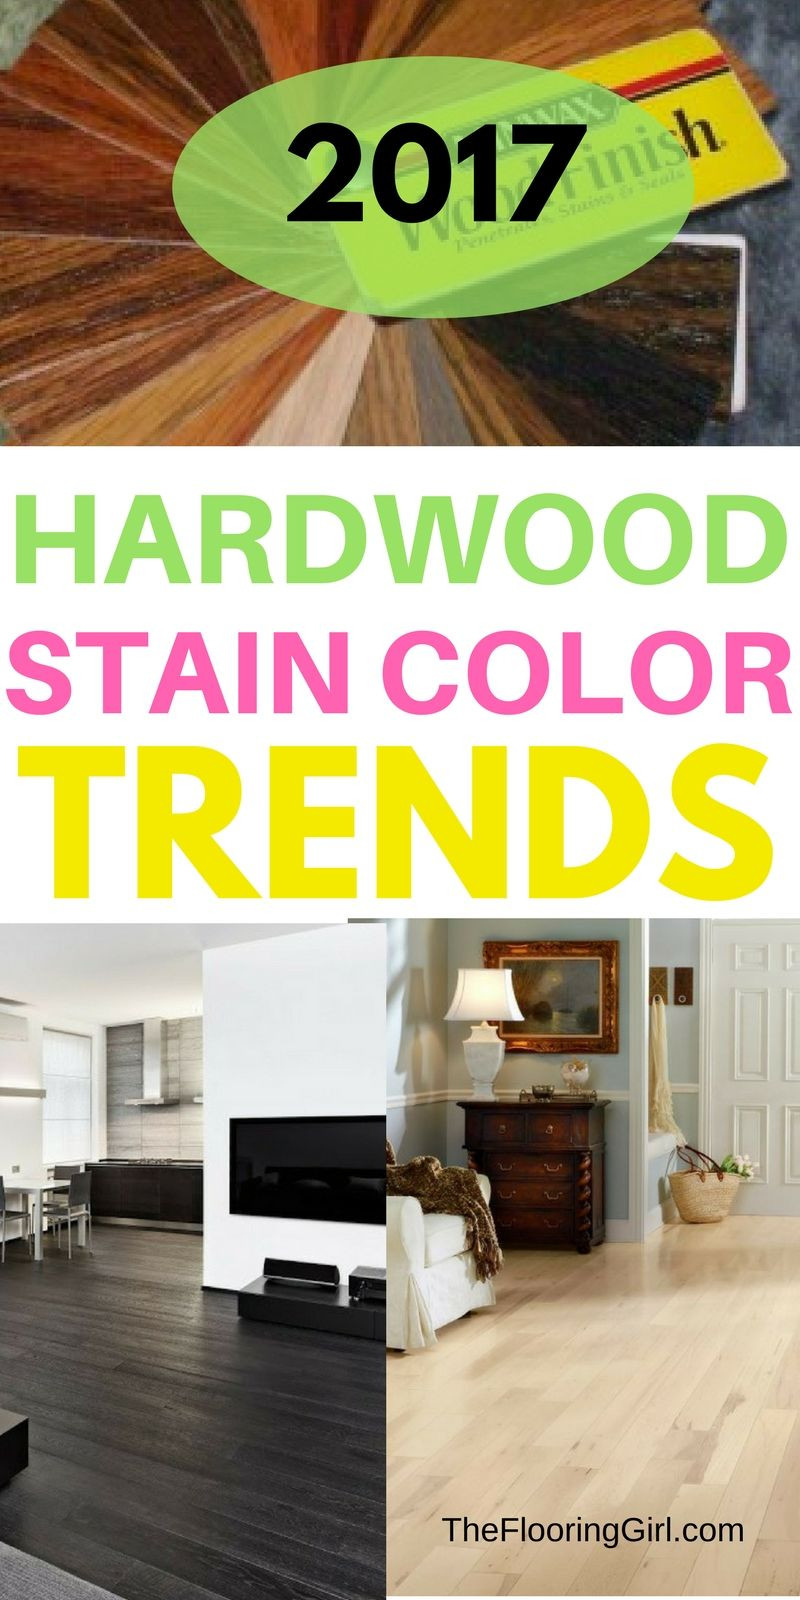 hardwood floor installation cost seattle of hardwood flooring stain color trends 2018 more from the flooring throughout hardwood flooring stain color trends for 2017 hardwood colors that are in style theflooringgirl com